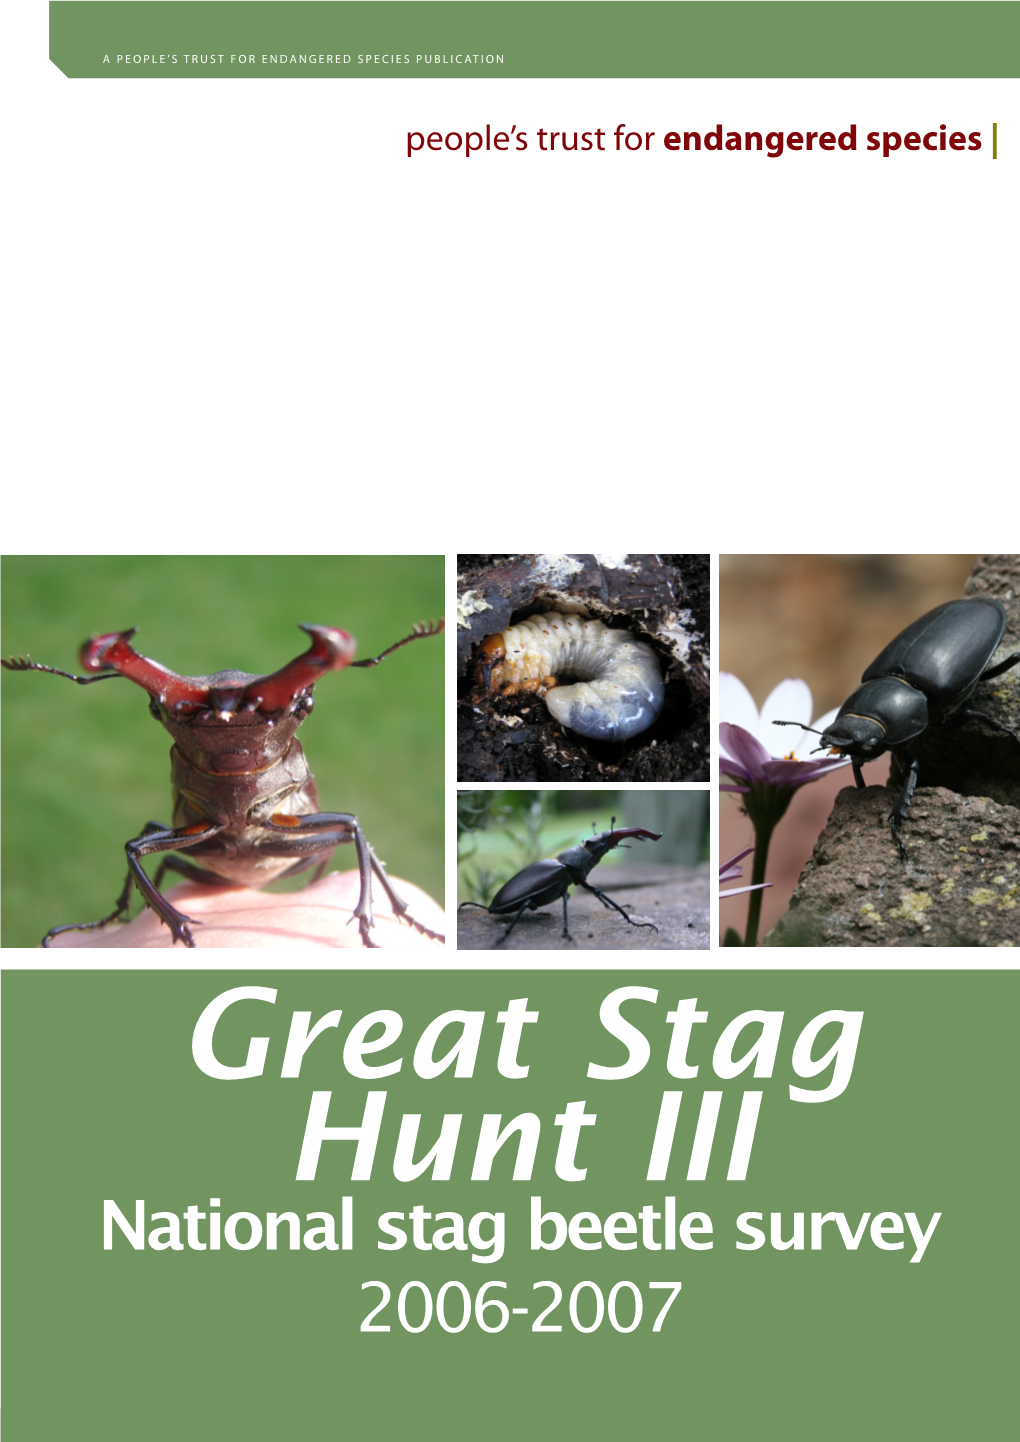 Great Stag Hunt 3 Report, 2006-2007